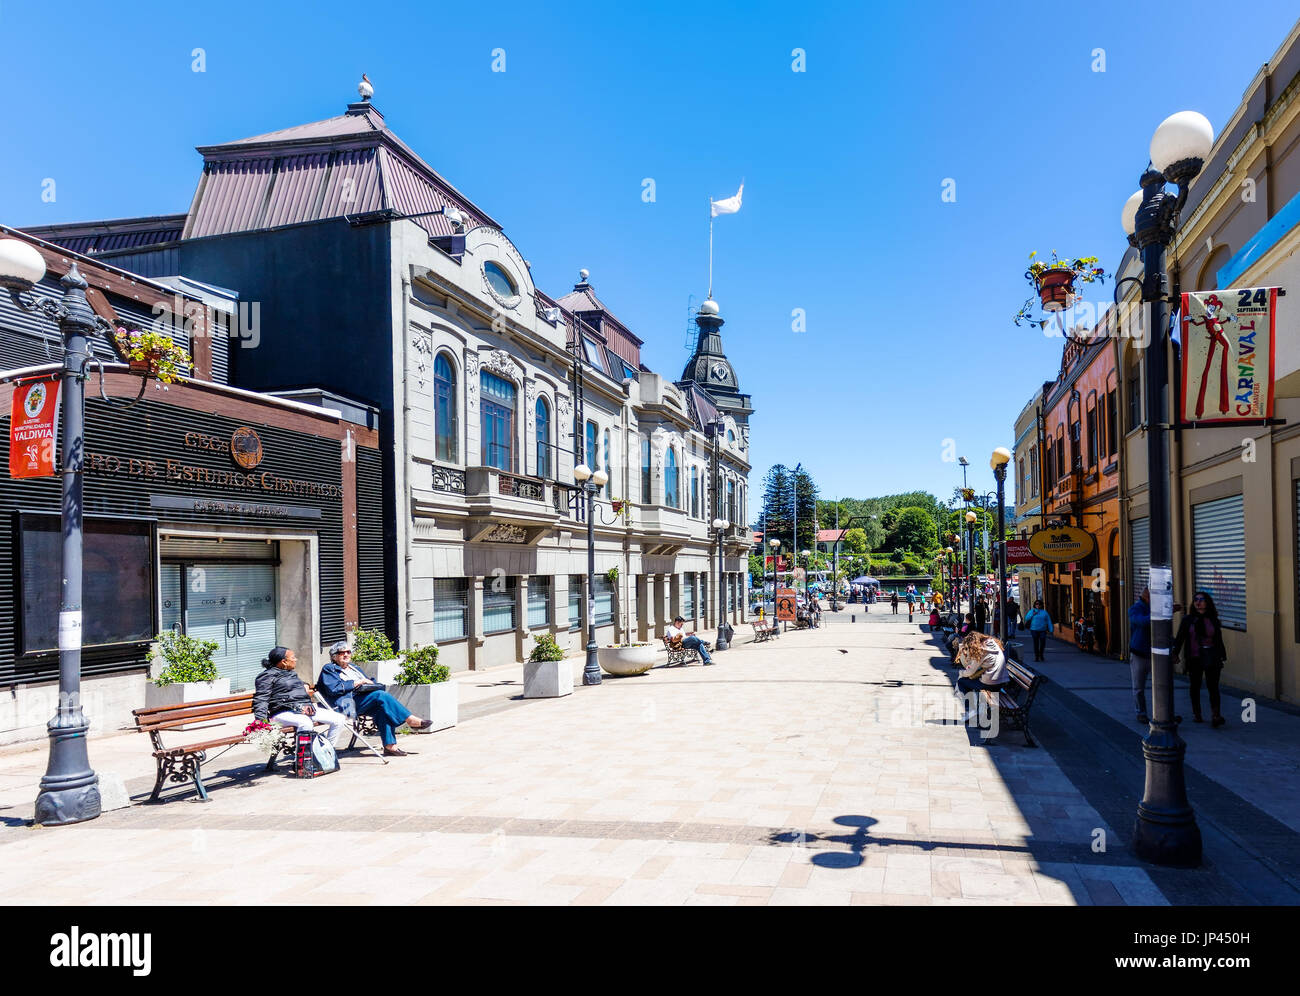 VALDIVIA, CHILE - OCTOBER 30, 2016: Pedestrian street Libertal in the center of Valdivia. This is the most beautiful and old part of the city. Stock Photo